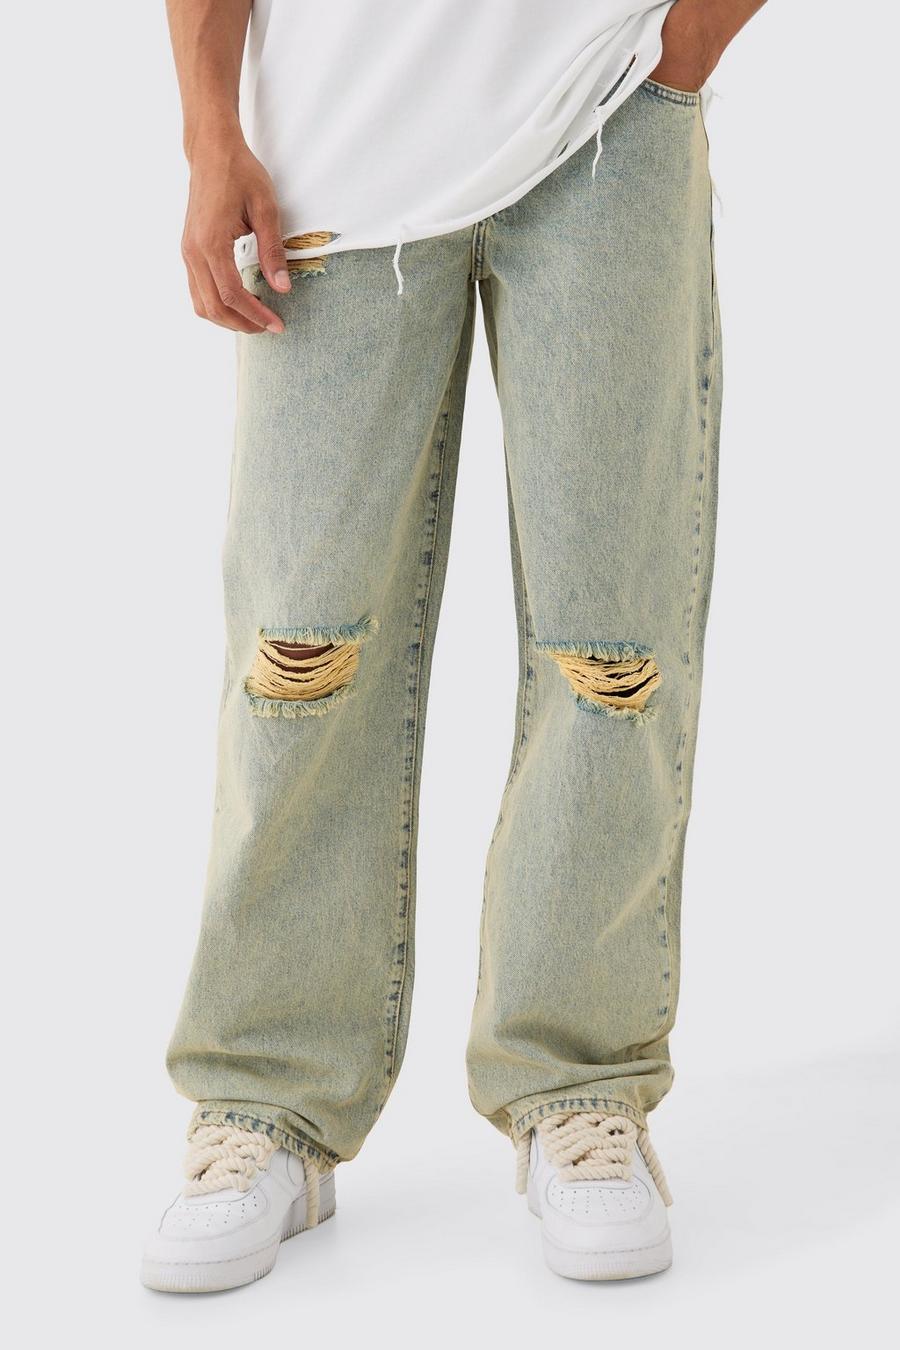 Baggy Rigid Green Tint Ripped Knee Jeans